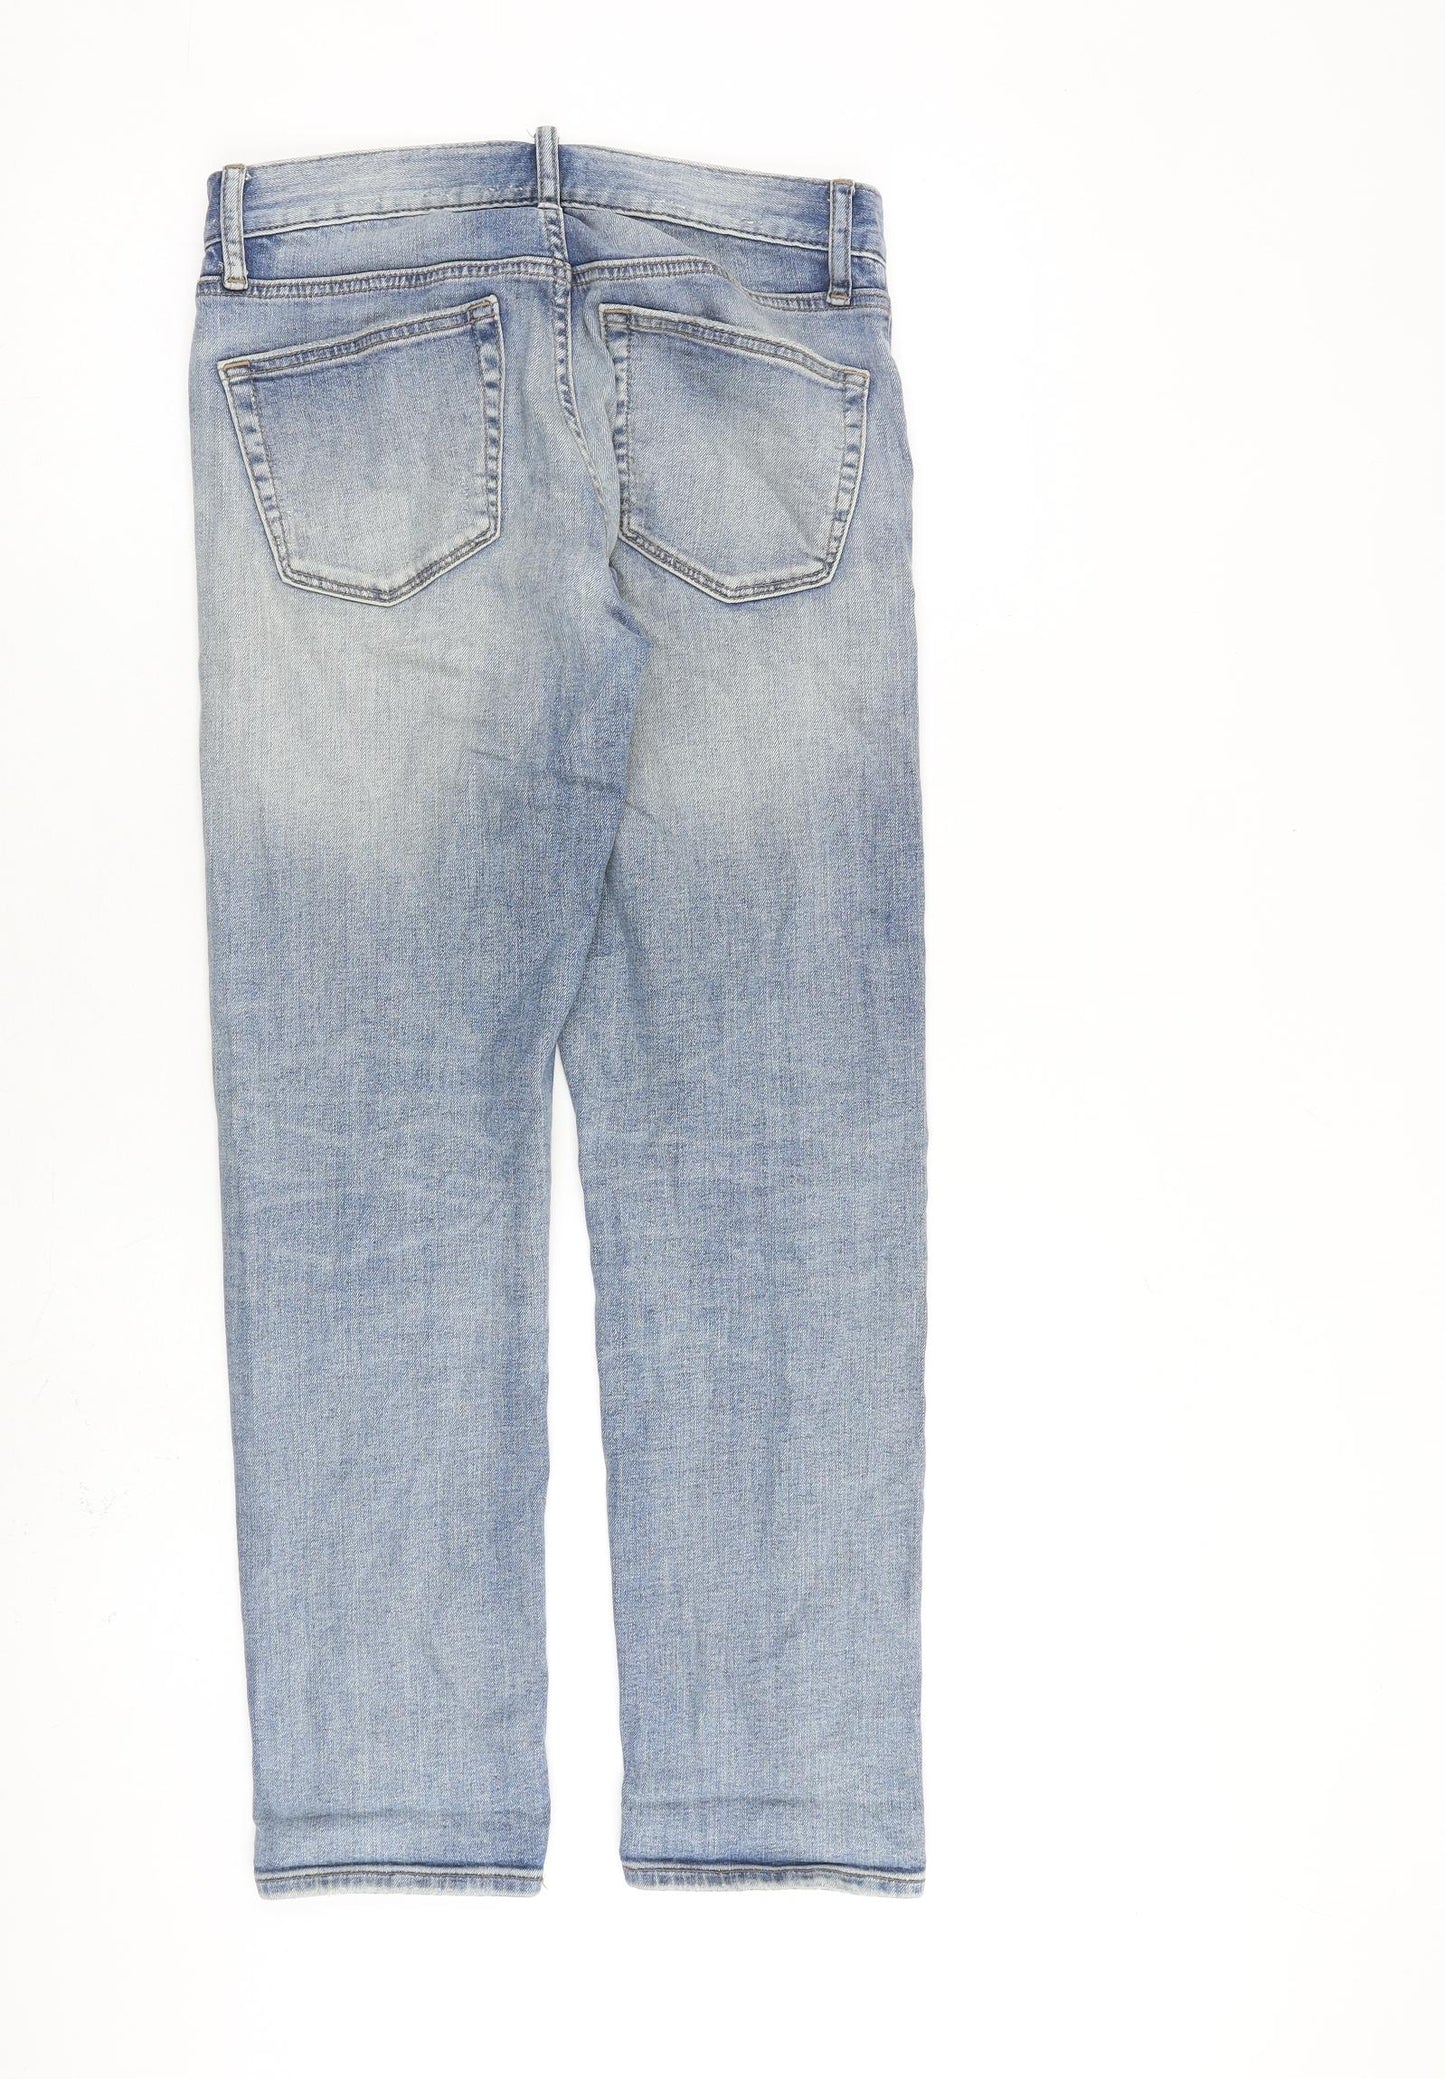 Uniqlo Mens Blue Cotton Straight Jeans Size 30 in L30 in Regular Zip